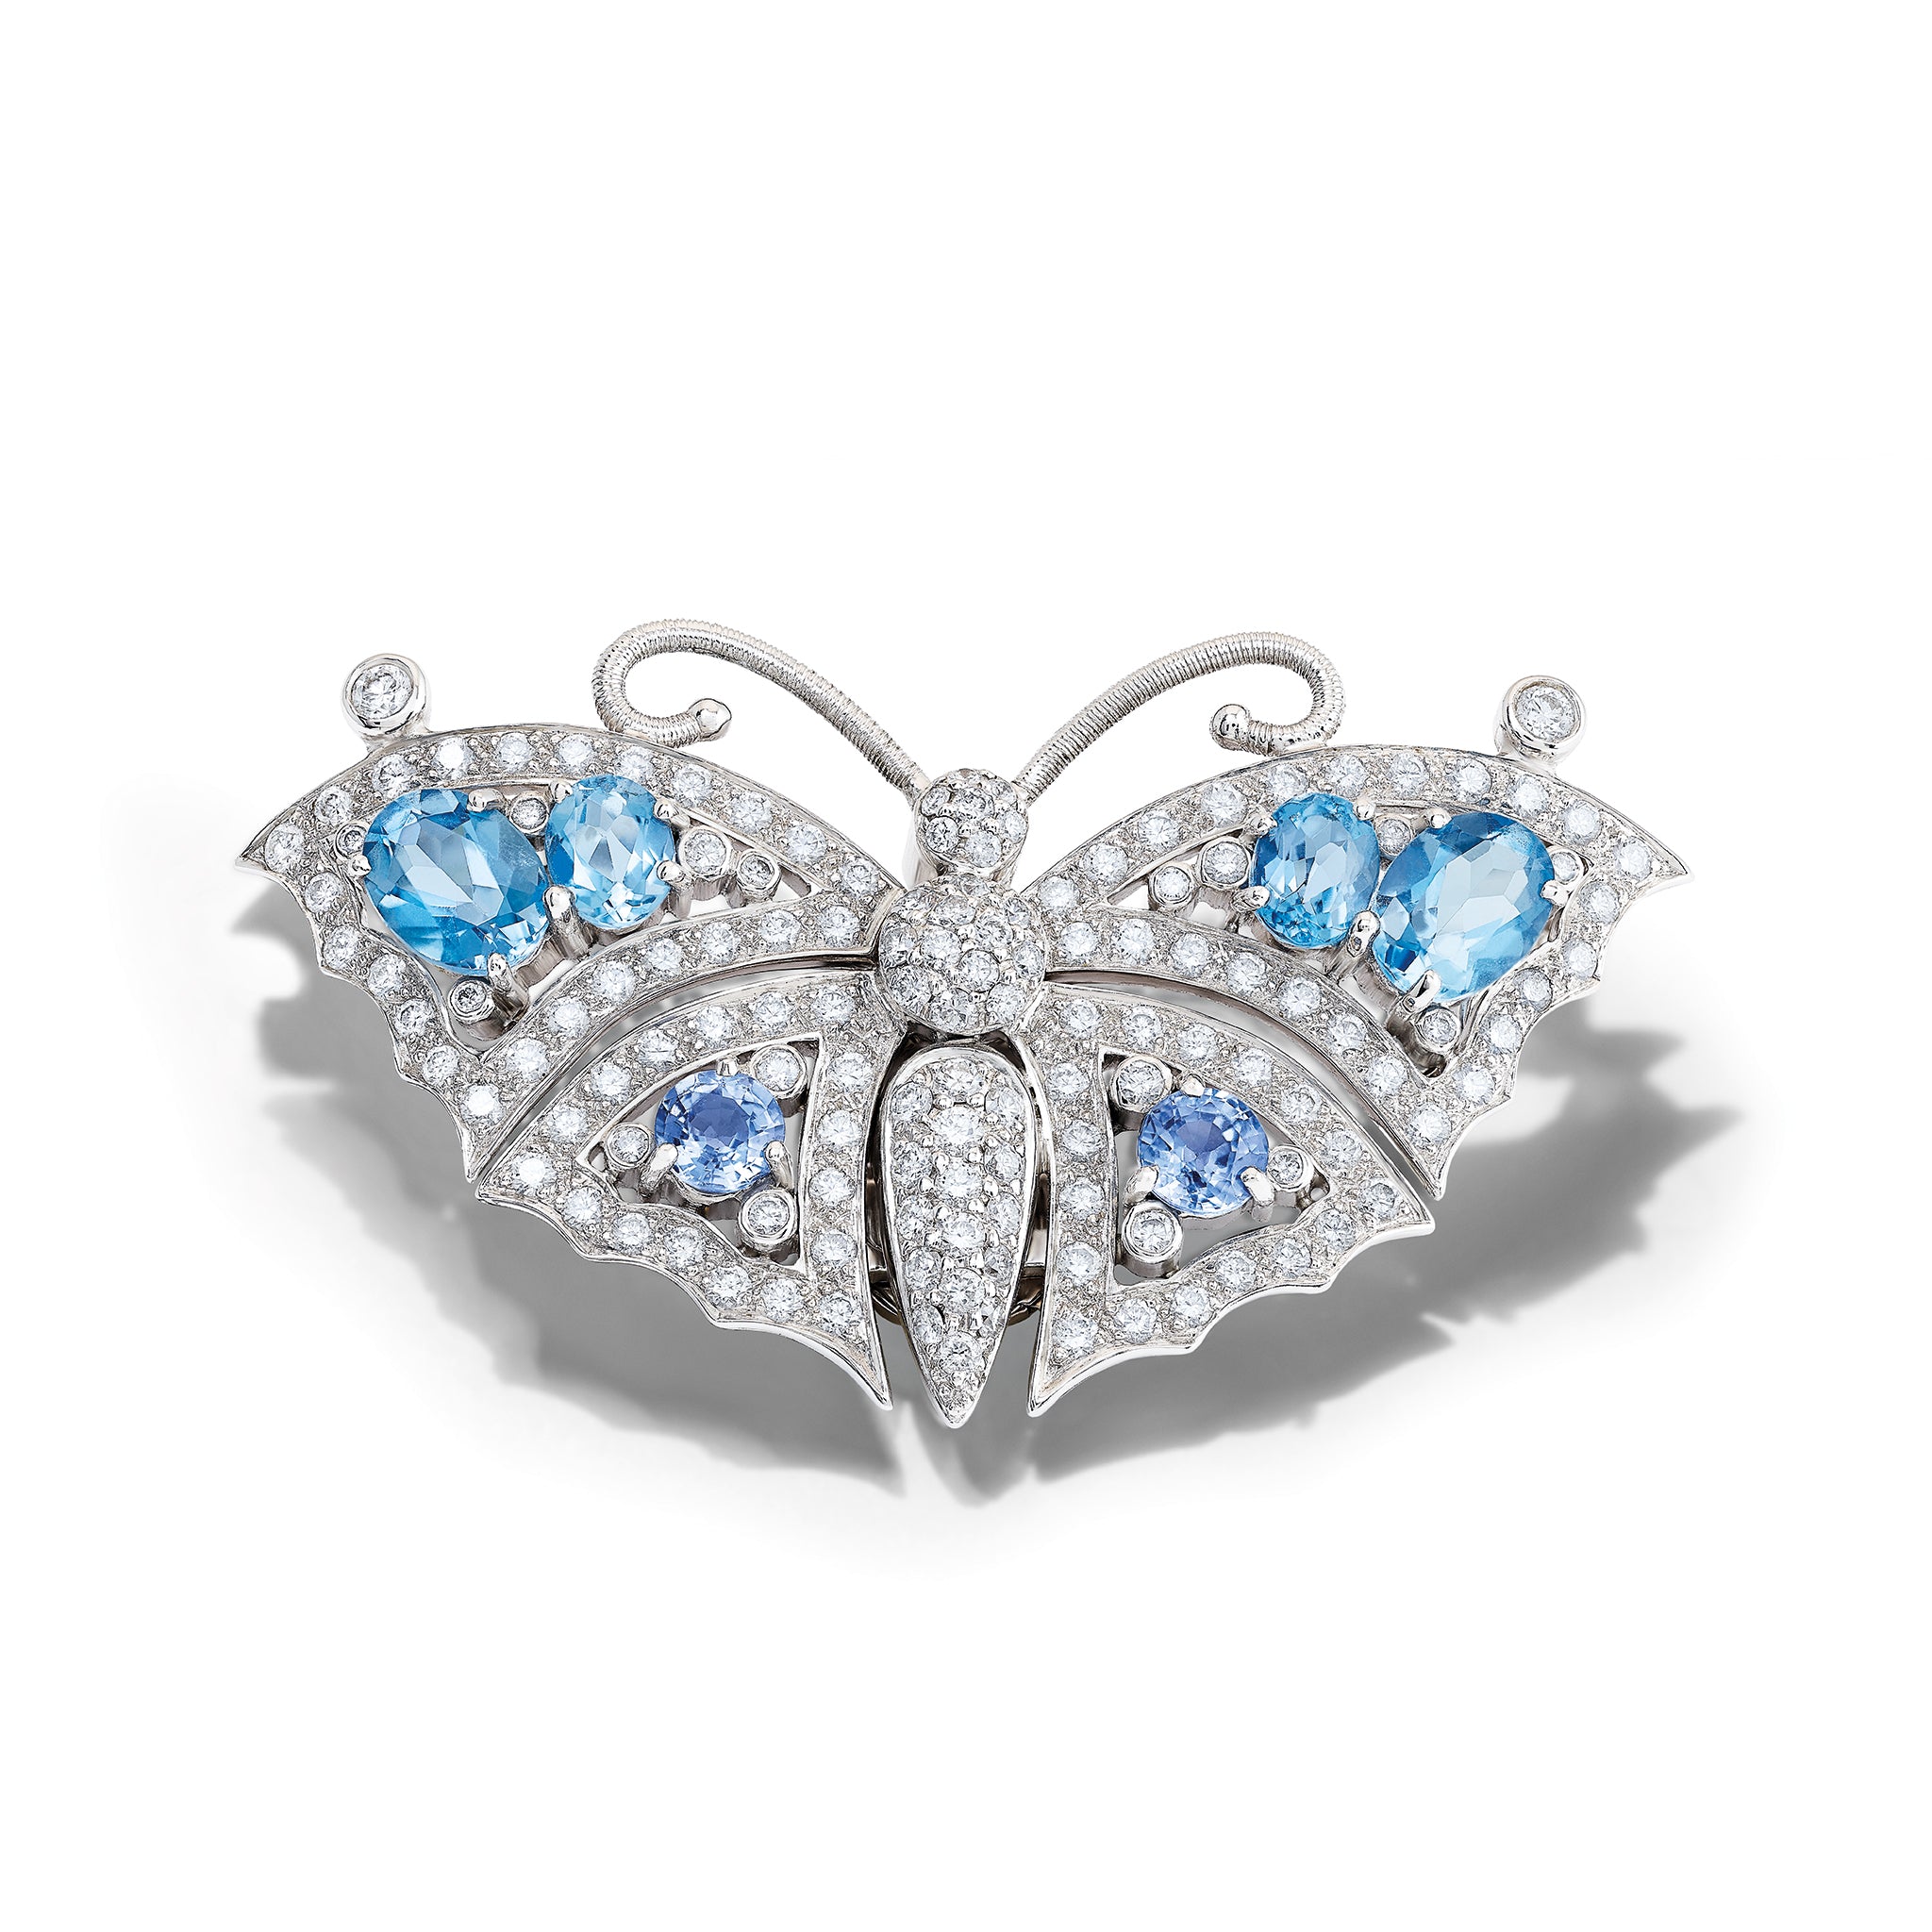 Beijing Butterfly Necklace Pendant 18ct White Gold - Sapphire, Aquamarine and Diamond